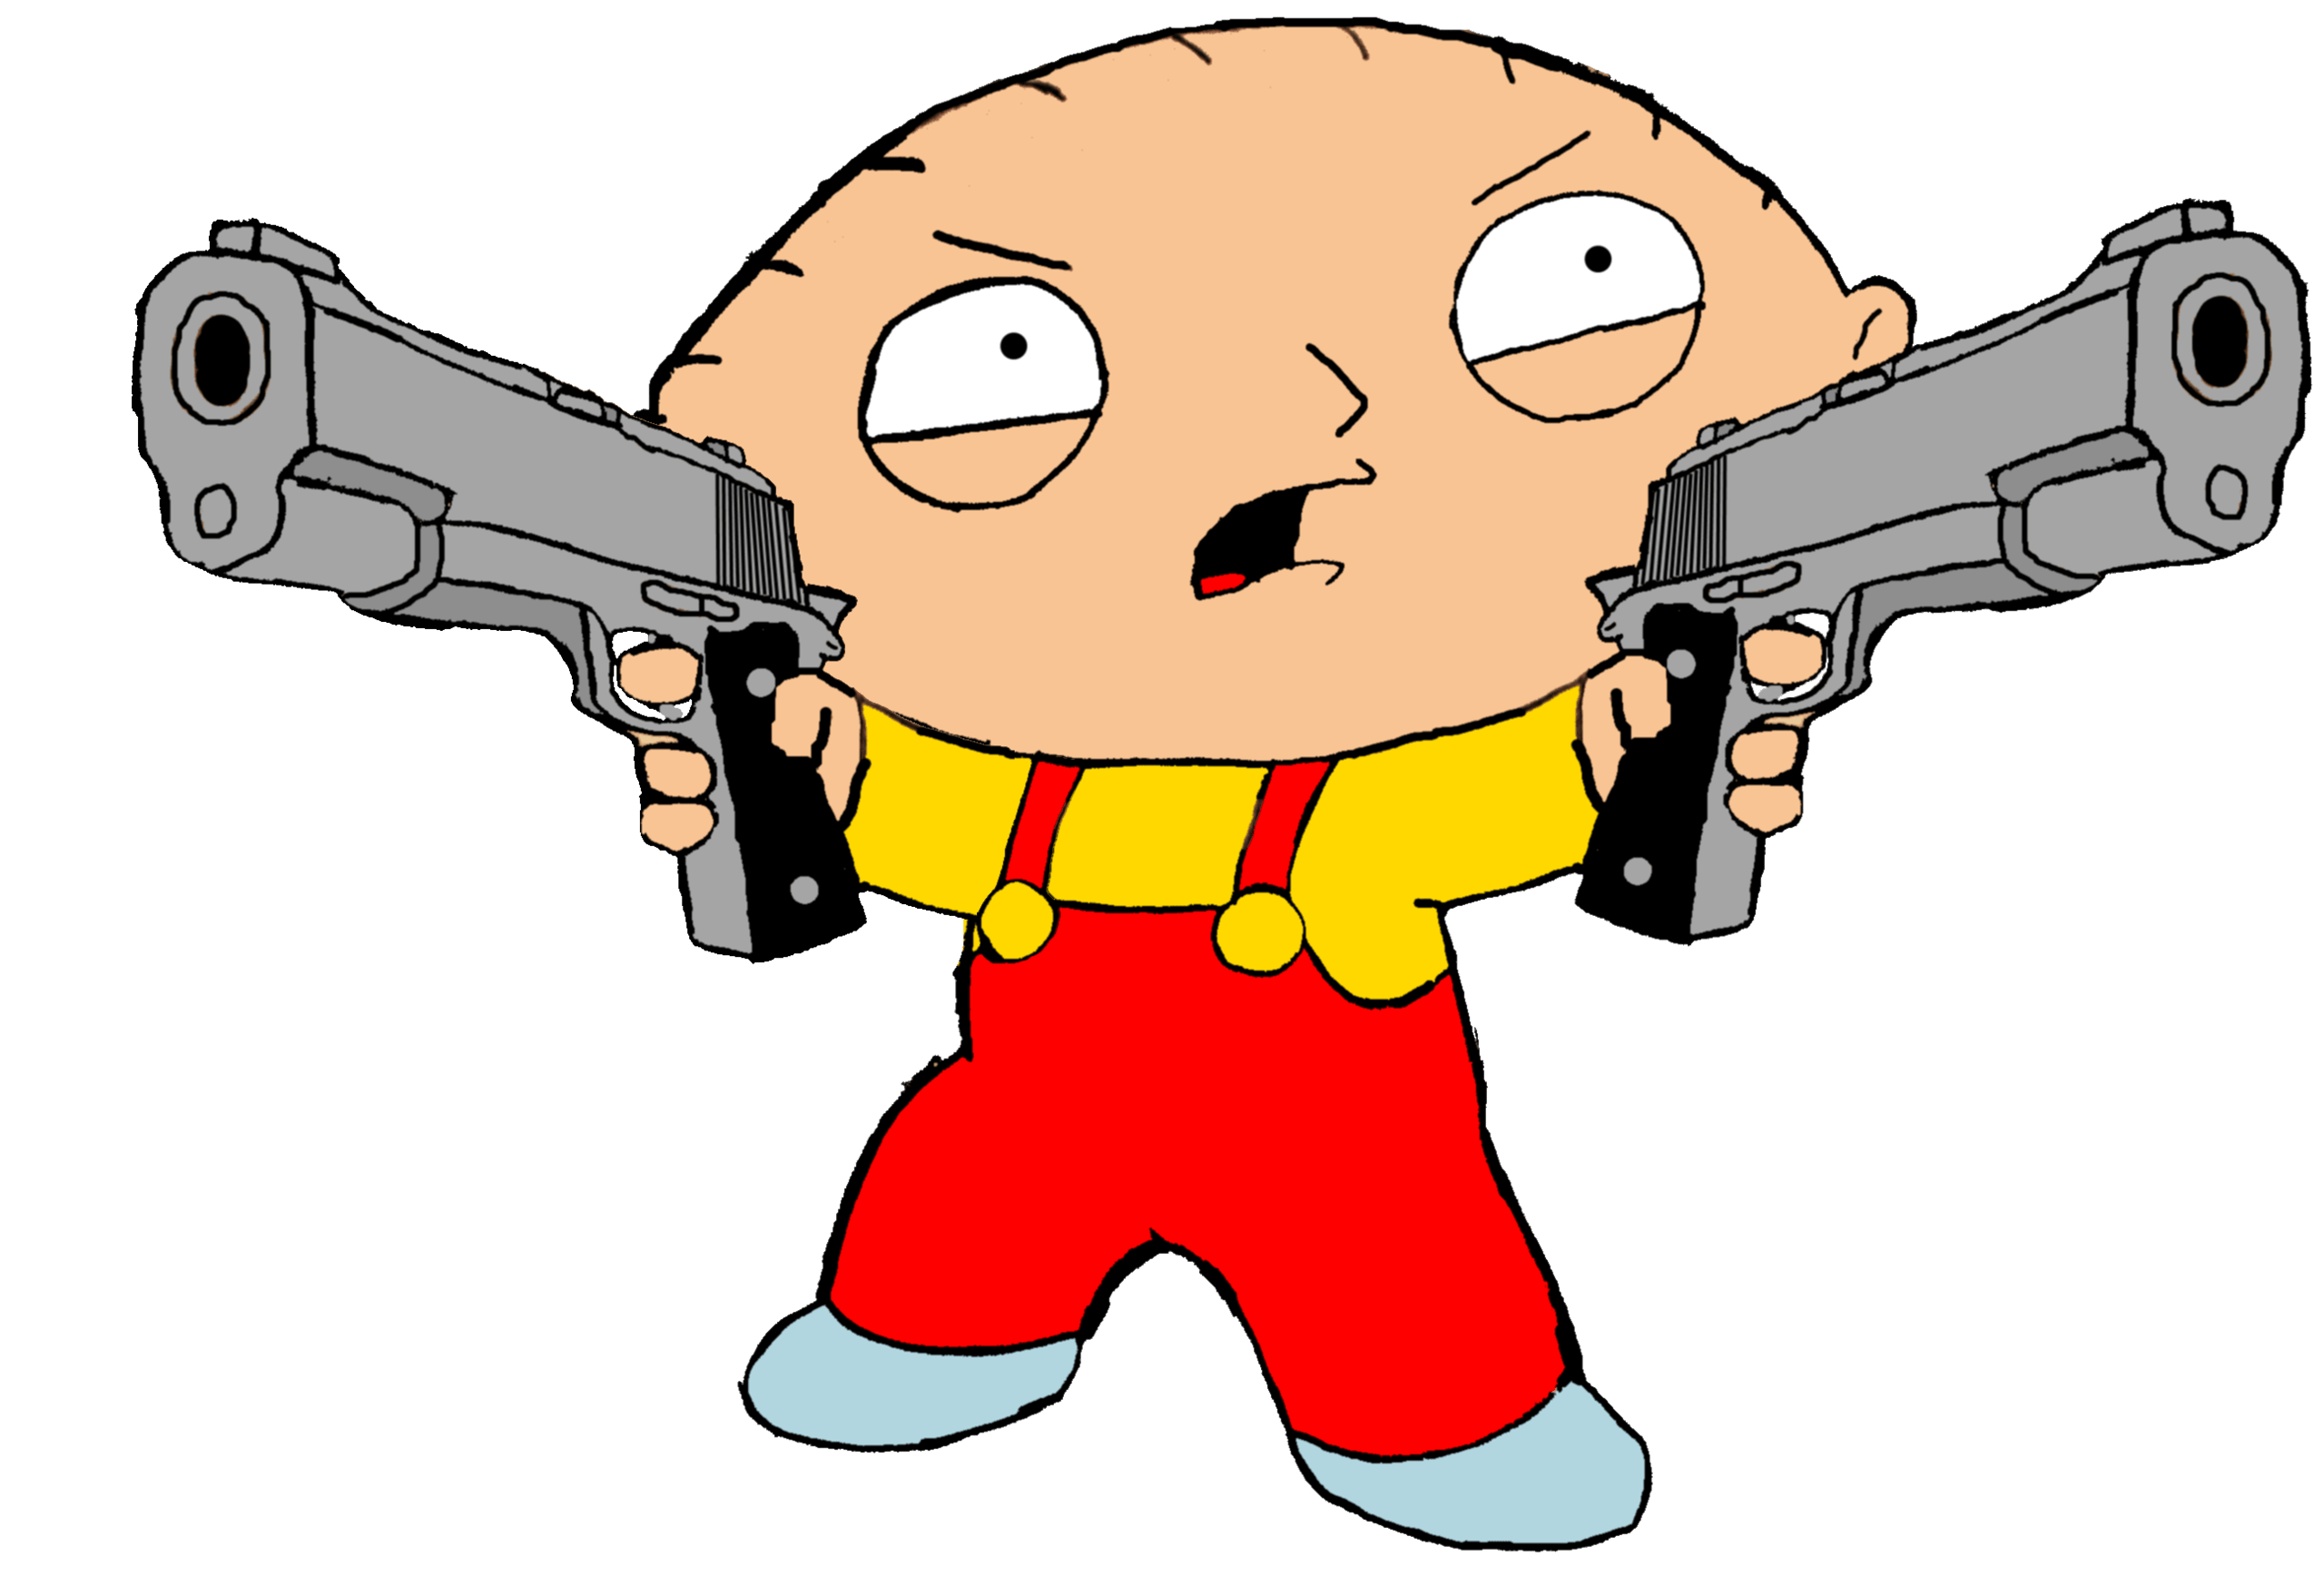 Stewie Griffin And Family Guy Funny - Stewie Griffin With Guns - HD Wallpaper 